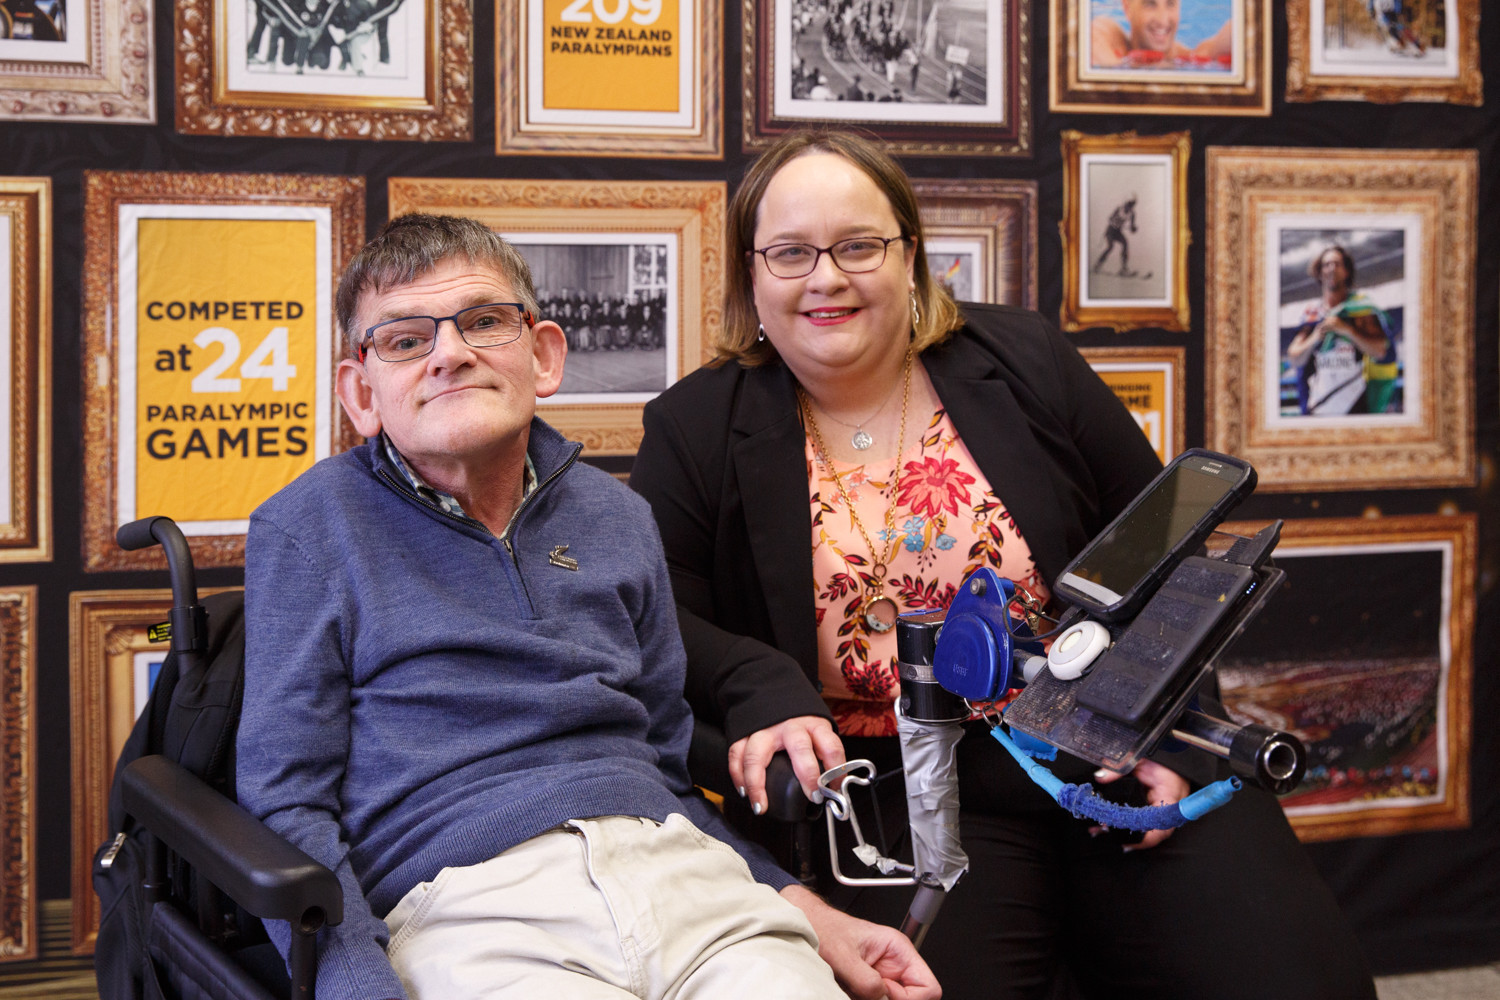 New Zealand Paralympians Greig Jackson and Sarah Powell were celebrated at the sixth community event as part of The Celebration Project in Palmerston North ©Kevin Bills Media